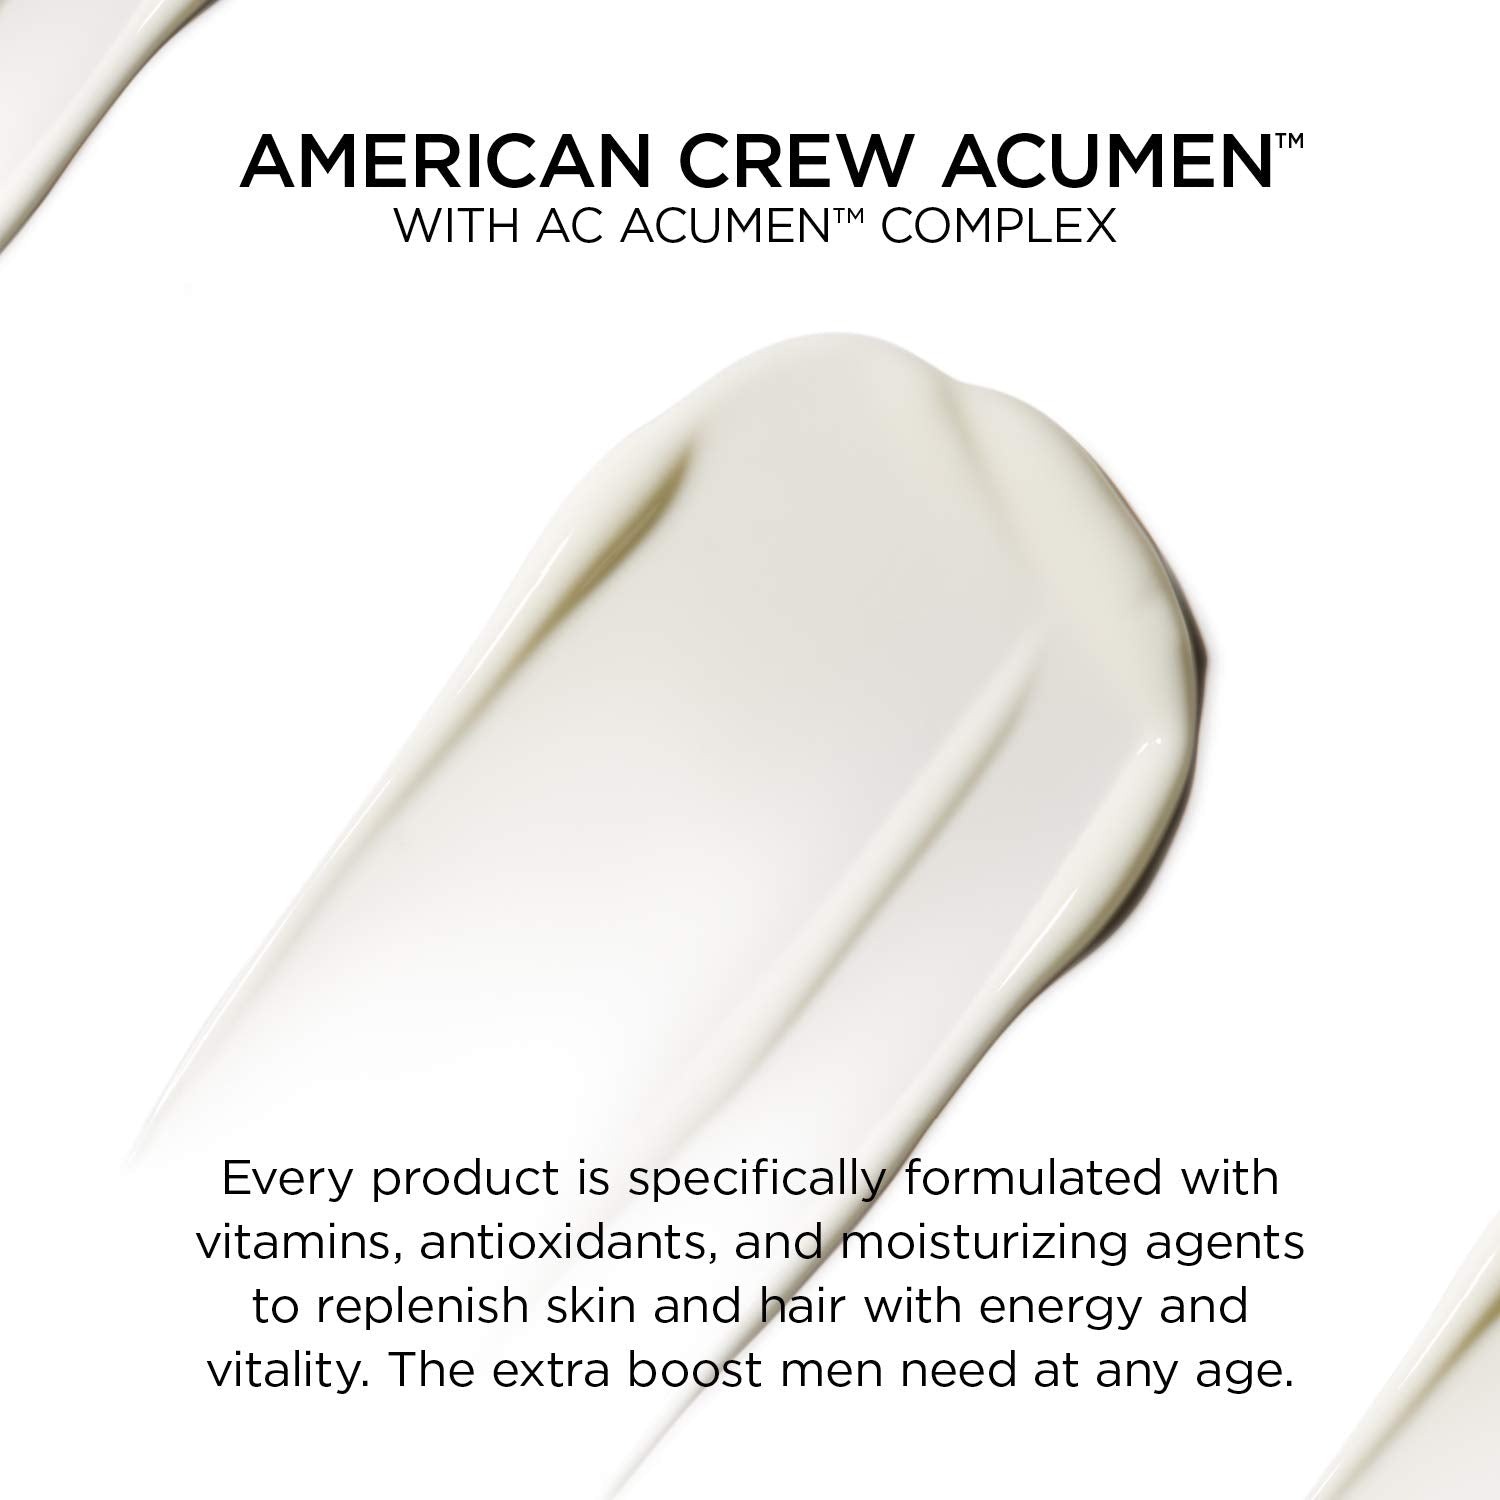 American Crew Men's Hand & Body Lotion, 24 Hour Help, Acumen Daily Lotion for Moisturized & Refreshing Skin, 6.4 Fl Oz : Beauty & Personal Care